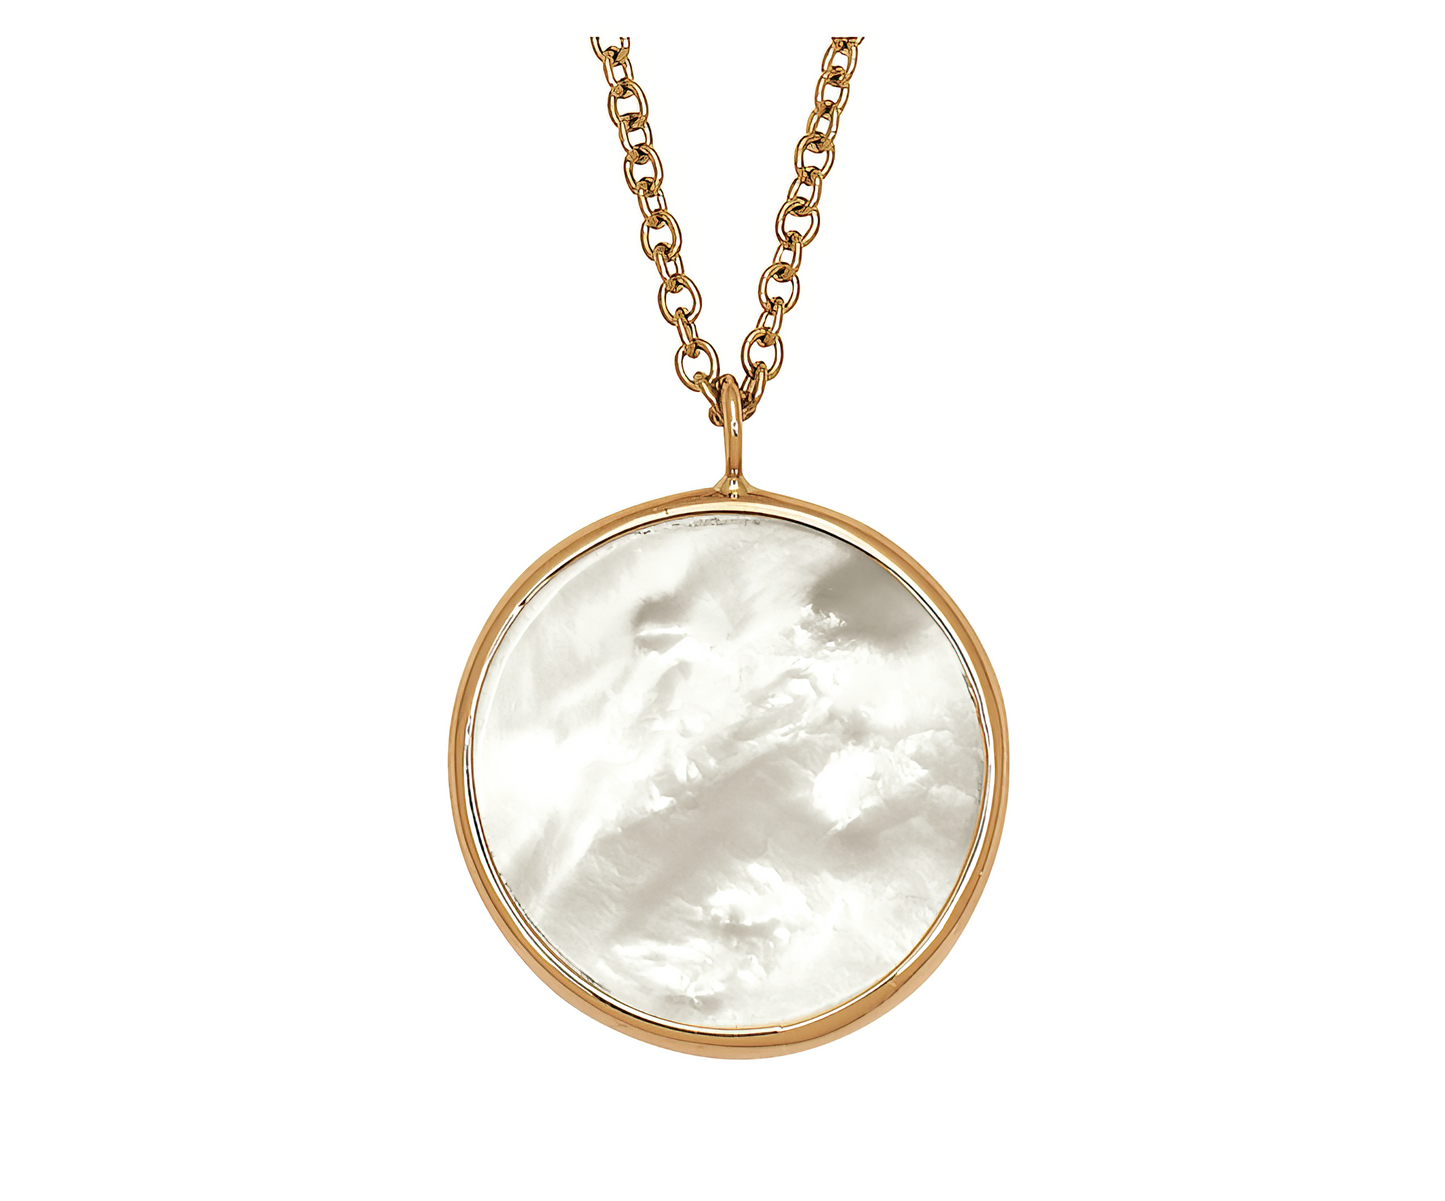 Round mother-of-pearl pendant necklace